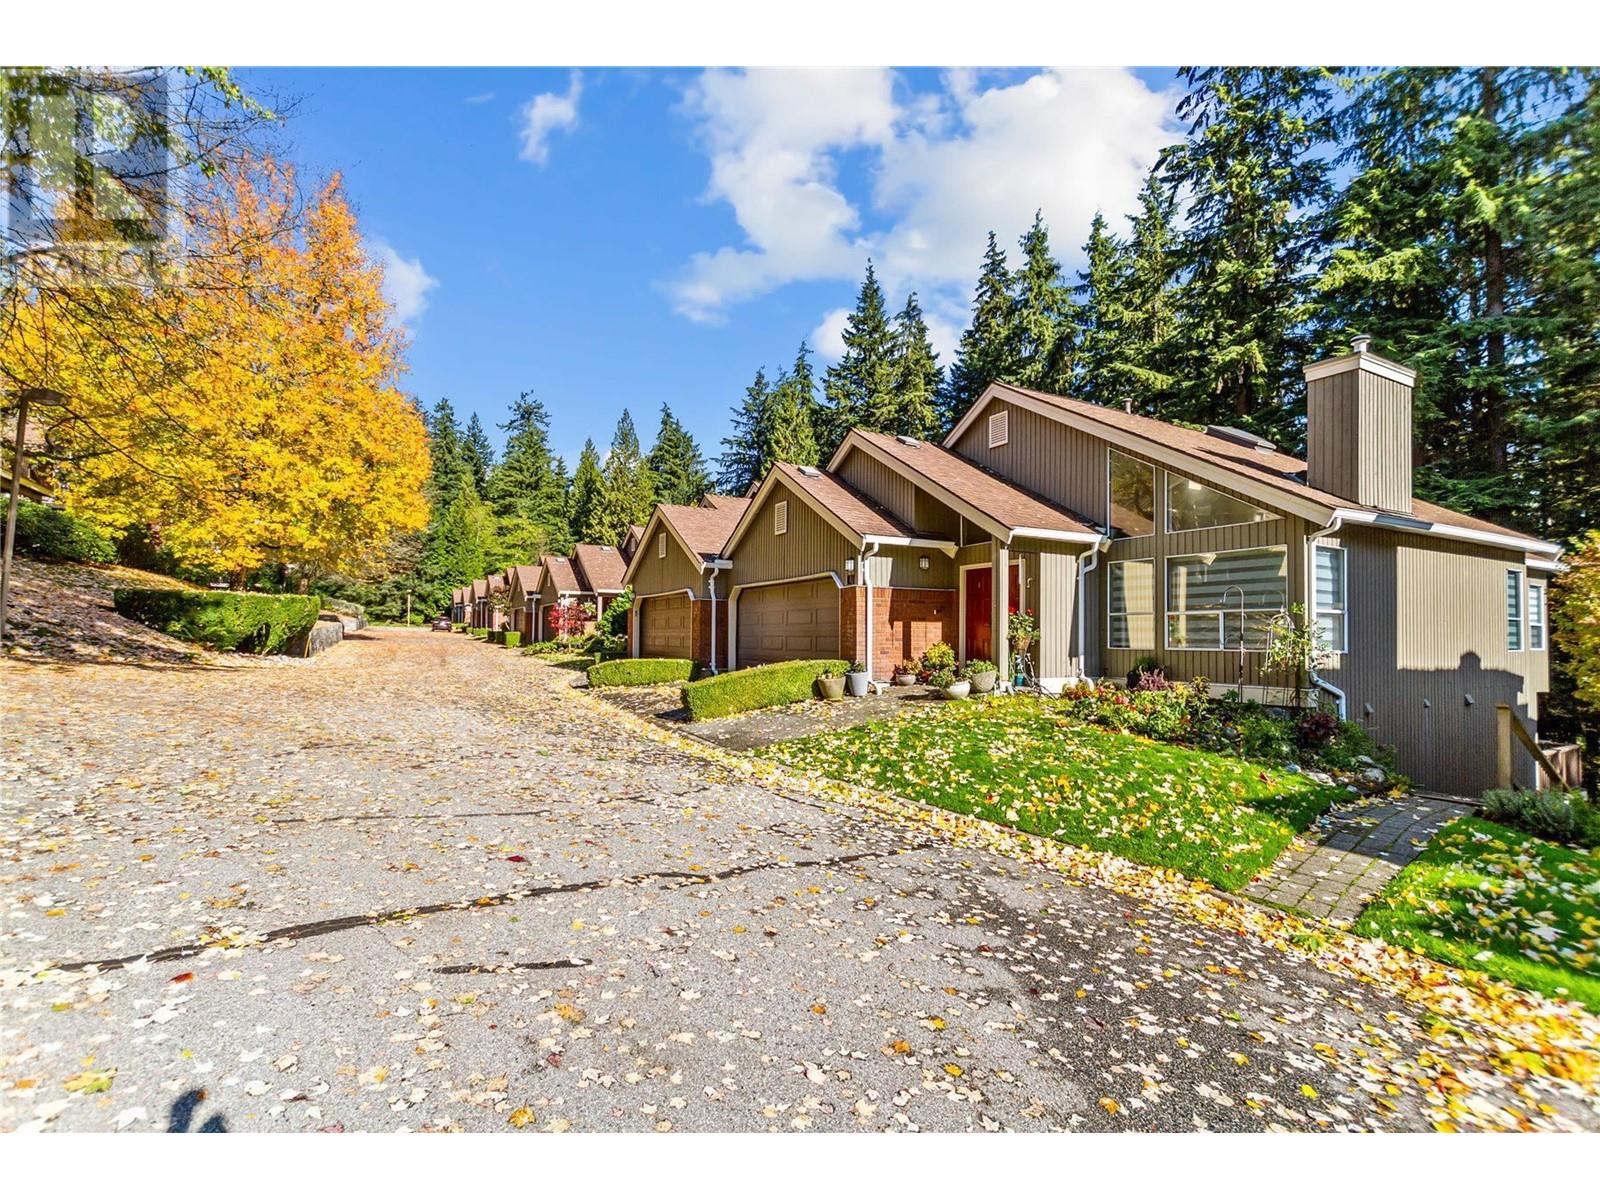 41 4055 INDIAN RIVER DRIVE, north vancouver, British Columbia